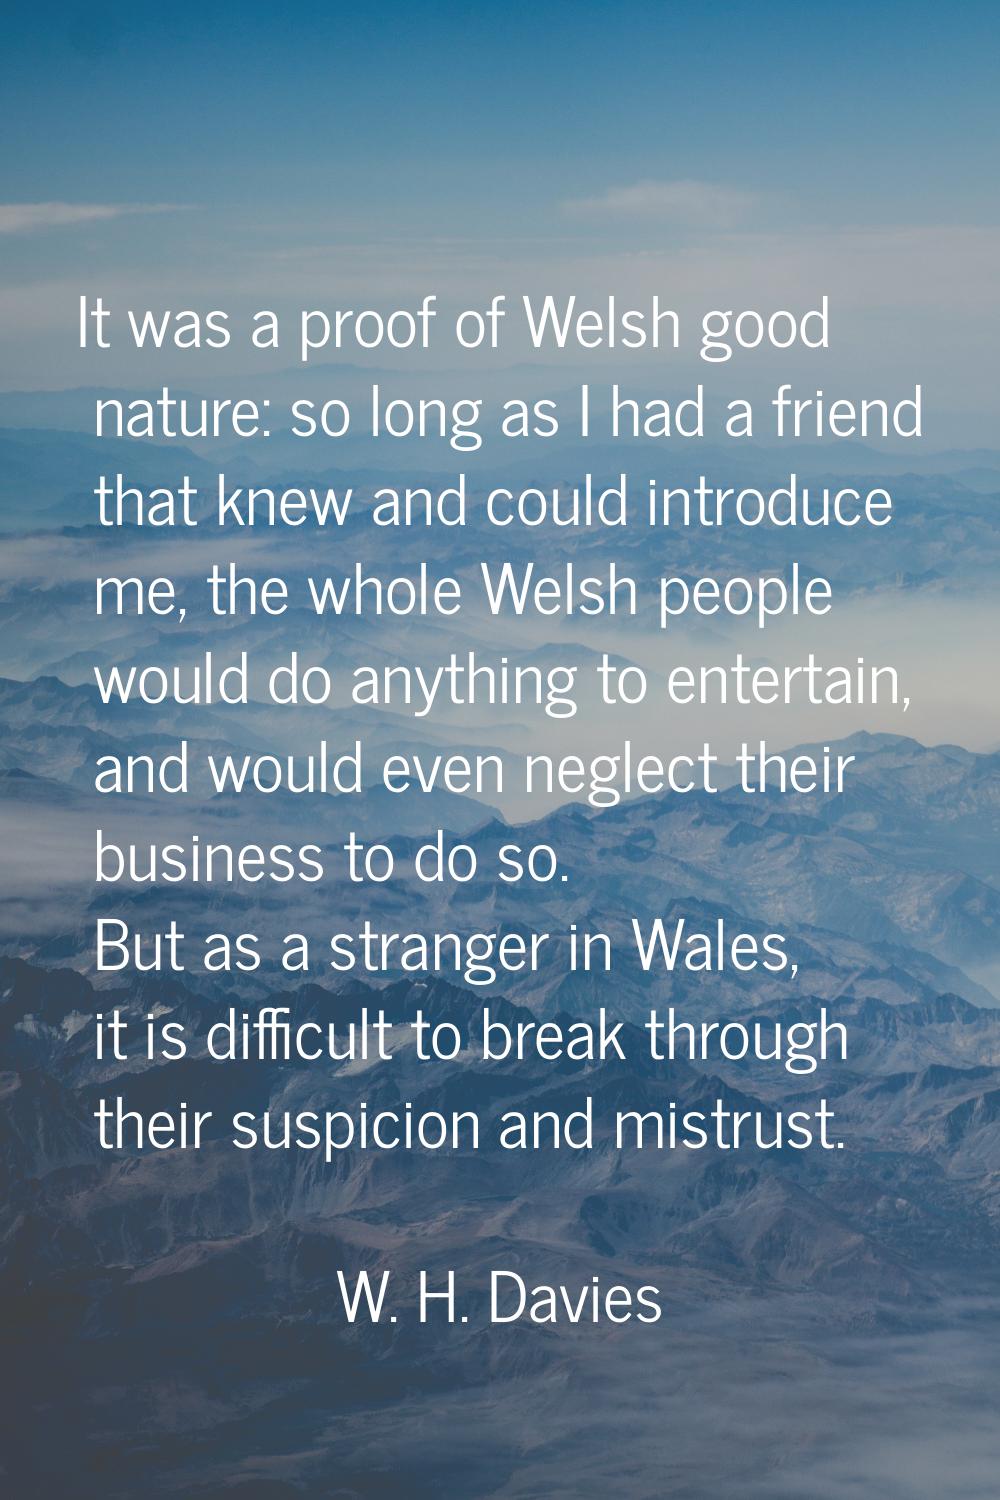 It was a proof of Welsh good nature: so long as I had a friend that knew and could introduce me, th